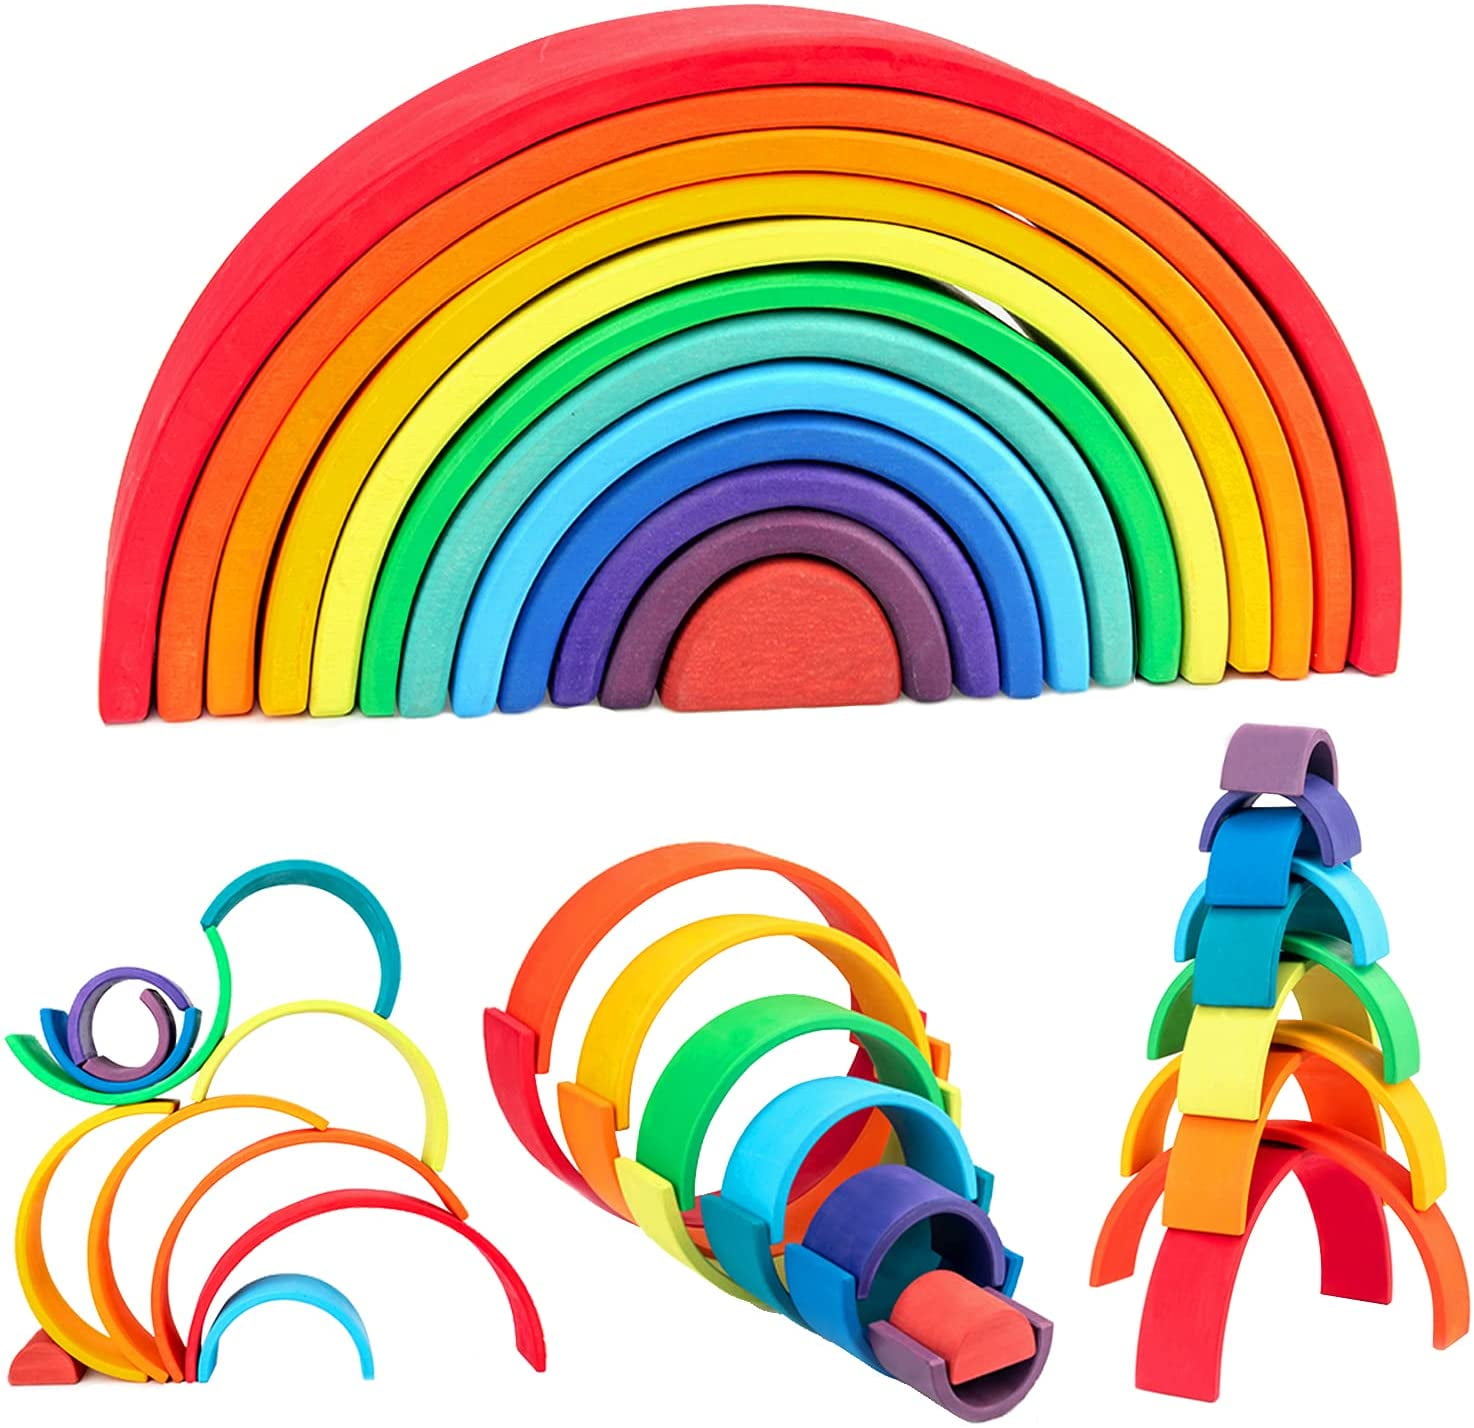 Wooden rainbow stacking toy Rainbow stacker Waldorf rainbow Wood rainbow unfinished Montessori wooden rainbow toy Sorting Stacking Rainbow building toy 12 Pcs pieces Extra Large Natural 